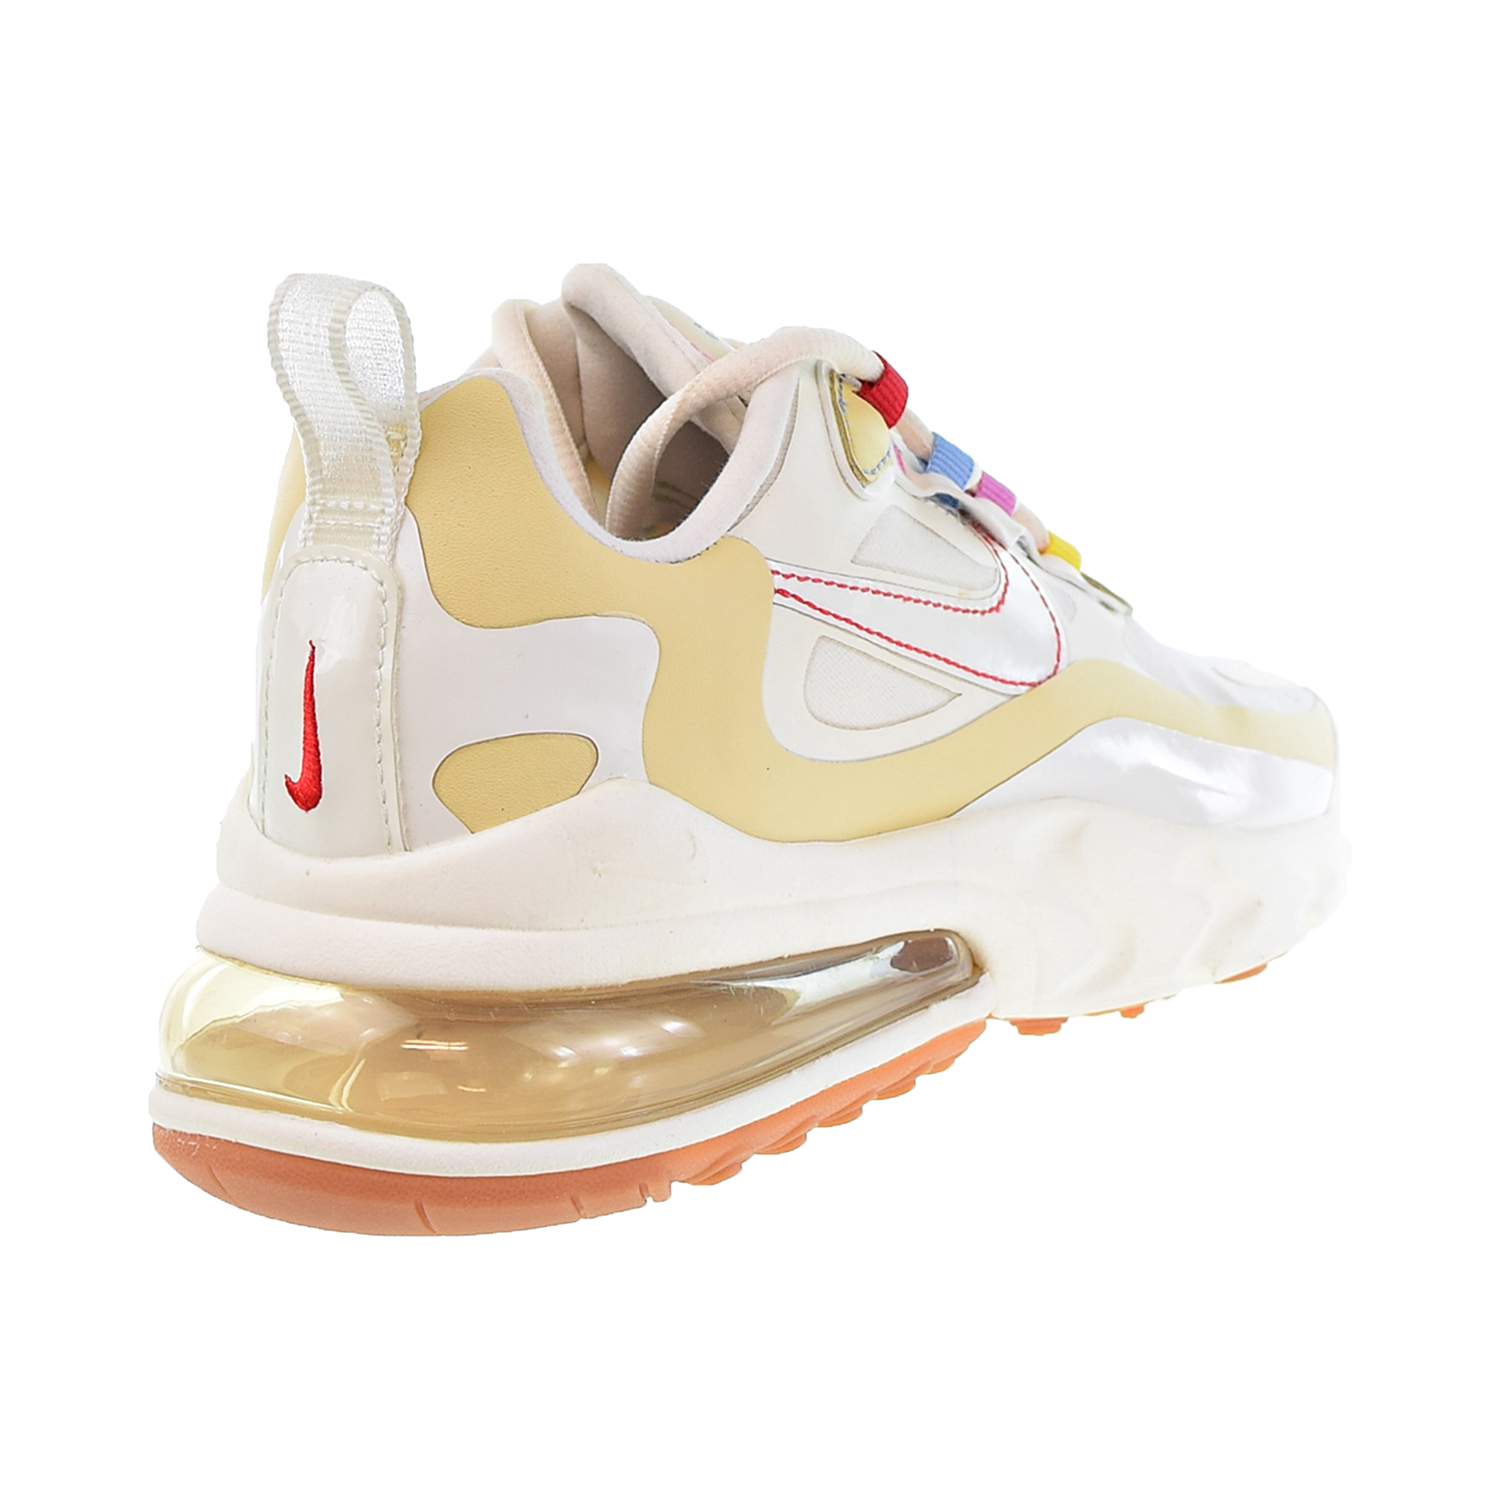 Nike Air Max 270 React Women's Shoes Pale Ivory-Sail-Pale Vanilla cq0208-101 - image 3 of 6